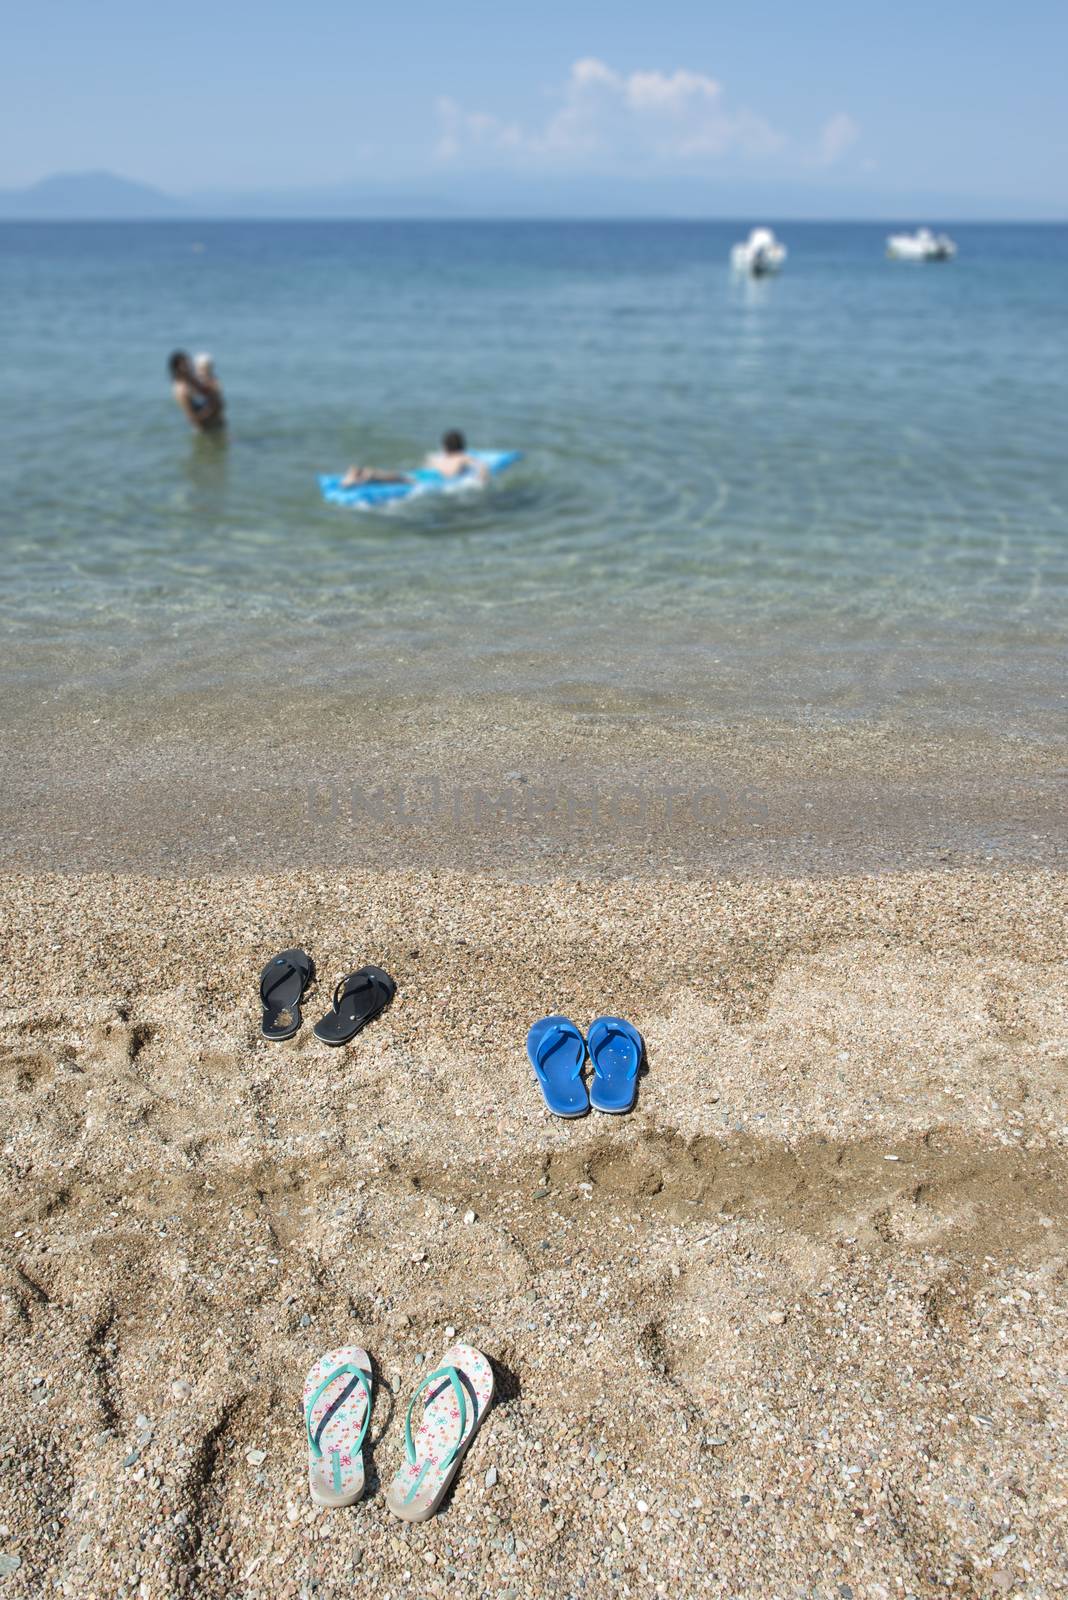 Slippers in the sand on the beach and people at sea. 